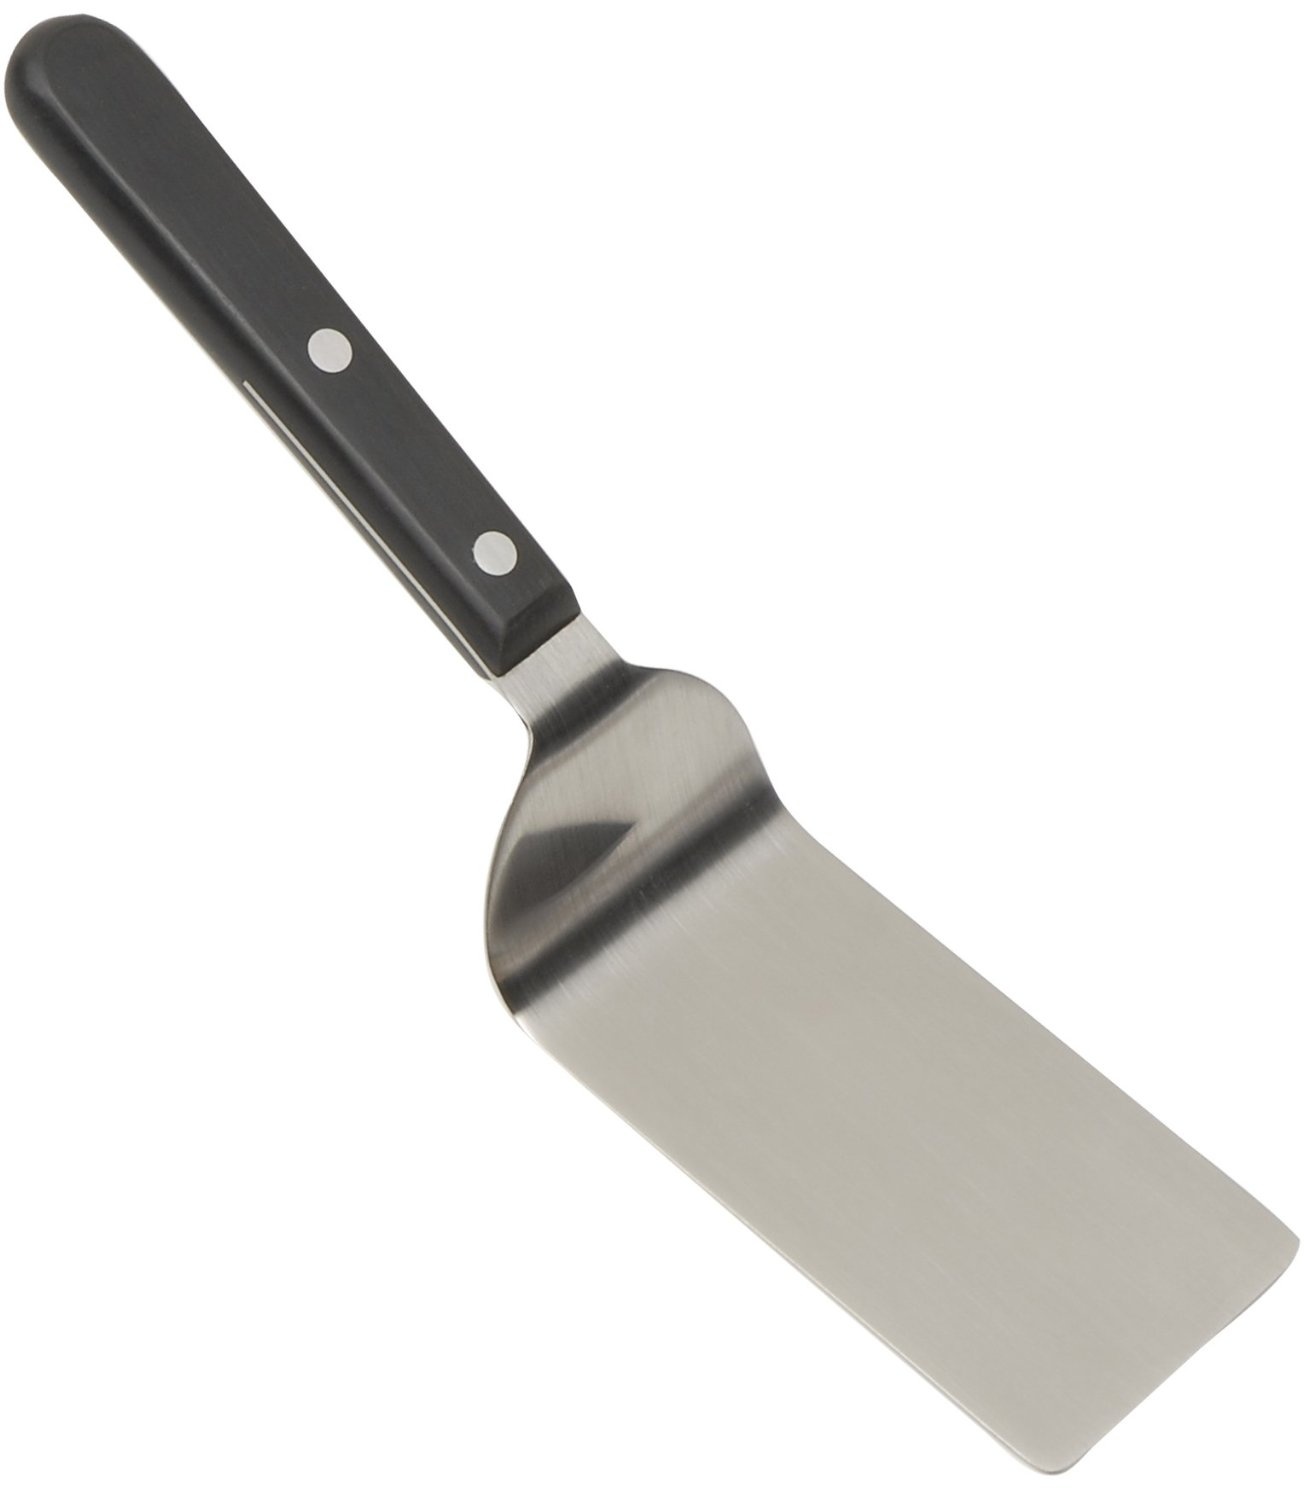 https://www.pastrychefsboutique.com/16308/ateco-1365-ateco-stainless-steel-cookie-spatula-spoons-and-spatulas.jpg